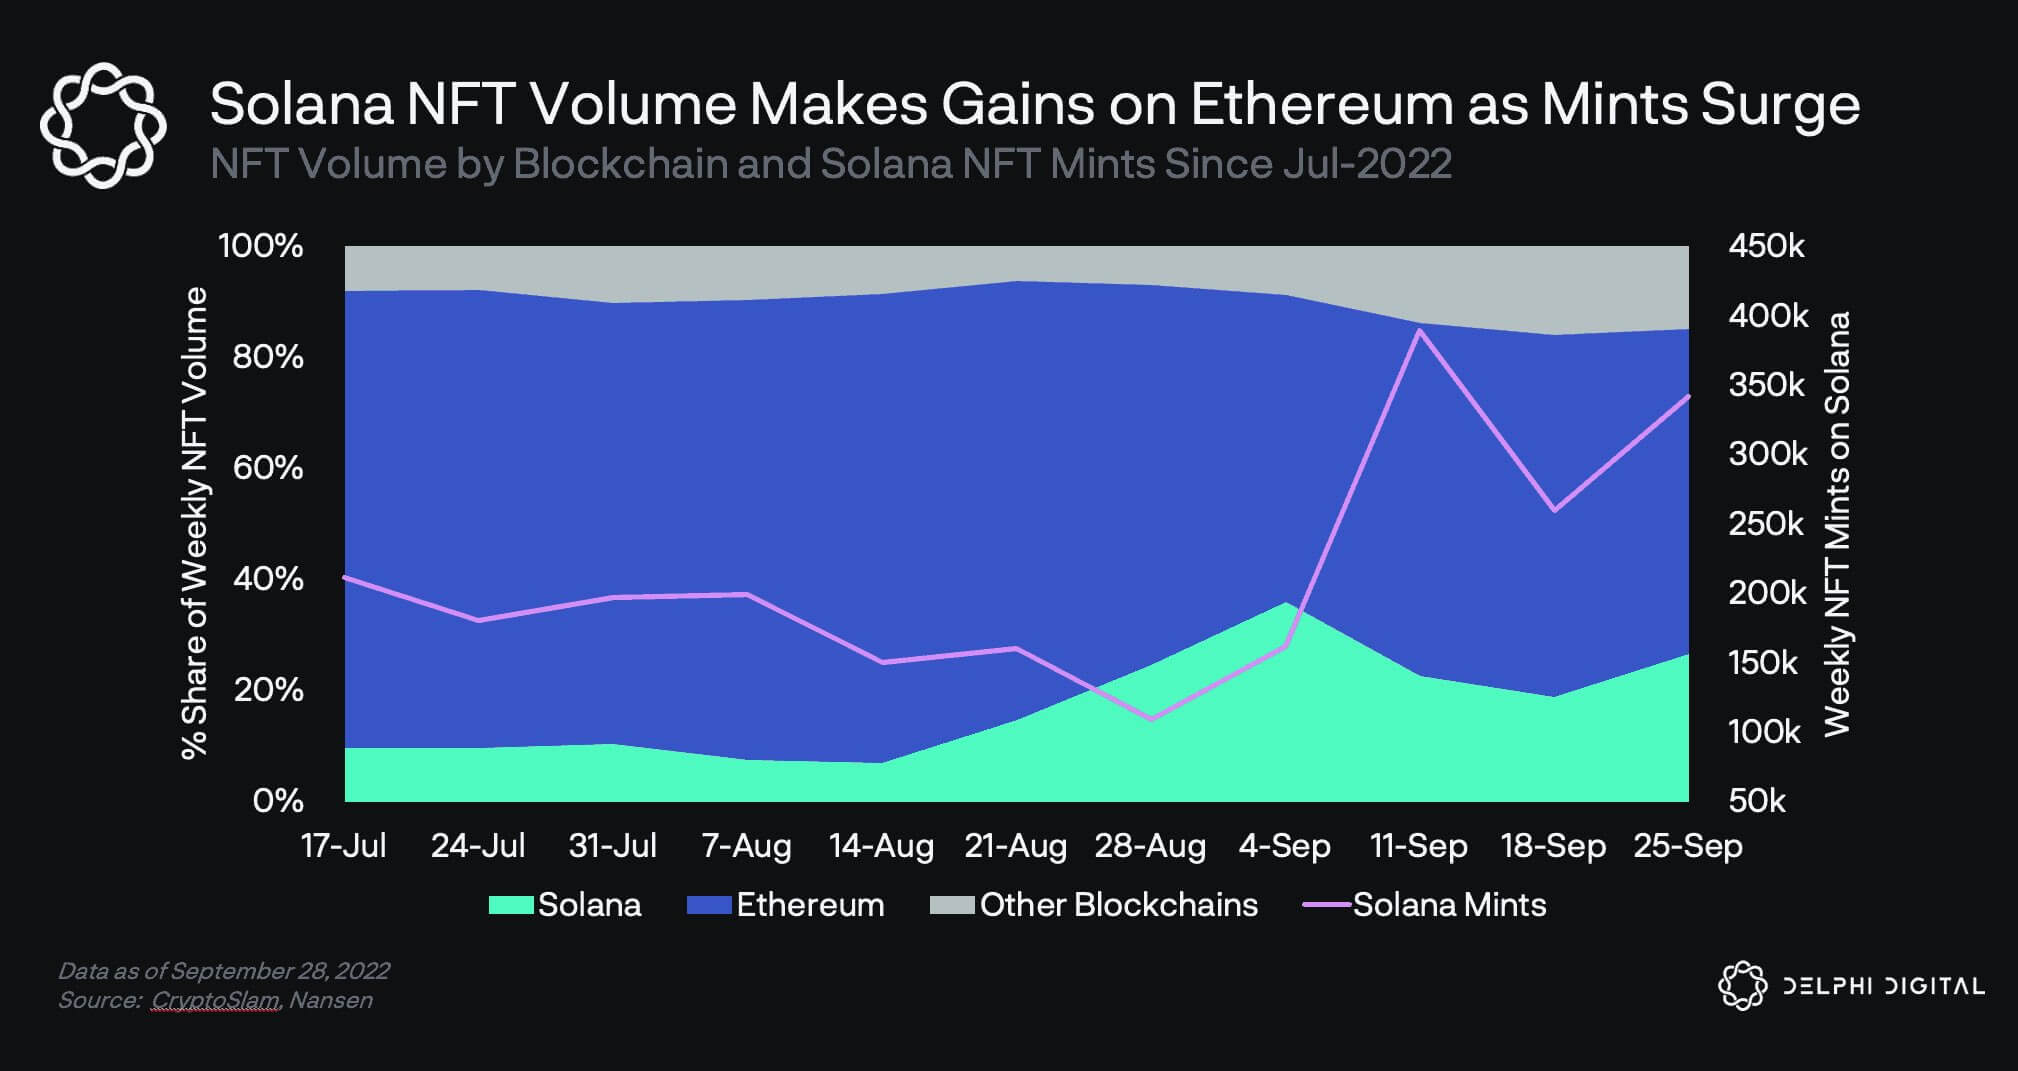 Ethereum losing ground as Solana now accounts for a quarter of total NFT volume